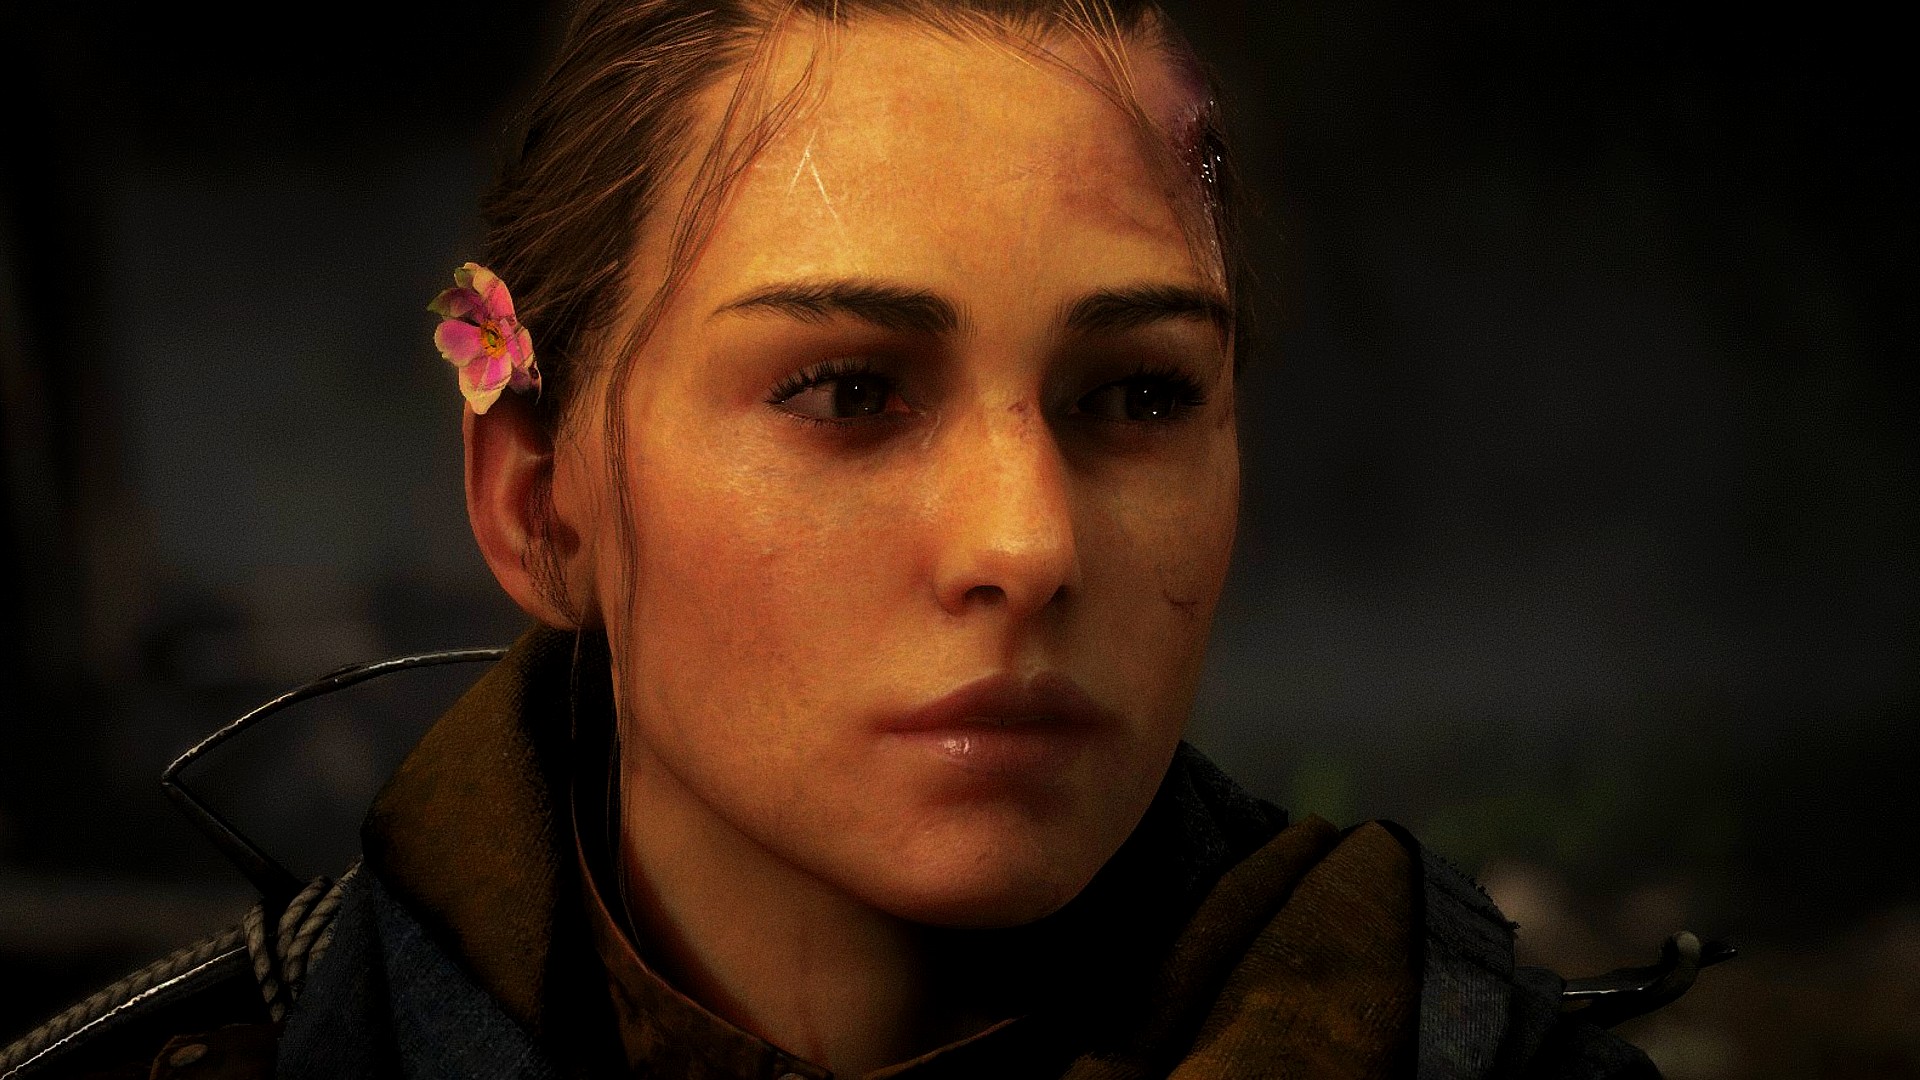 A Plague Tale 2 May Be in Development